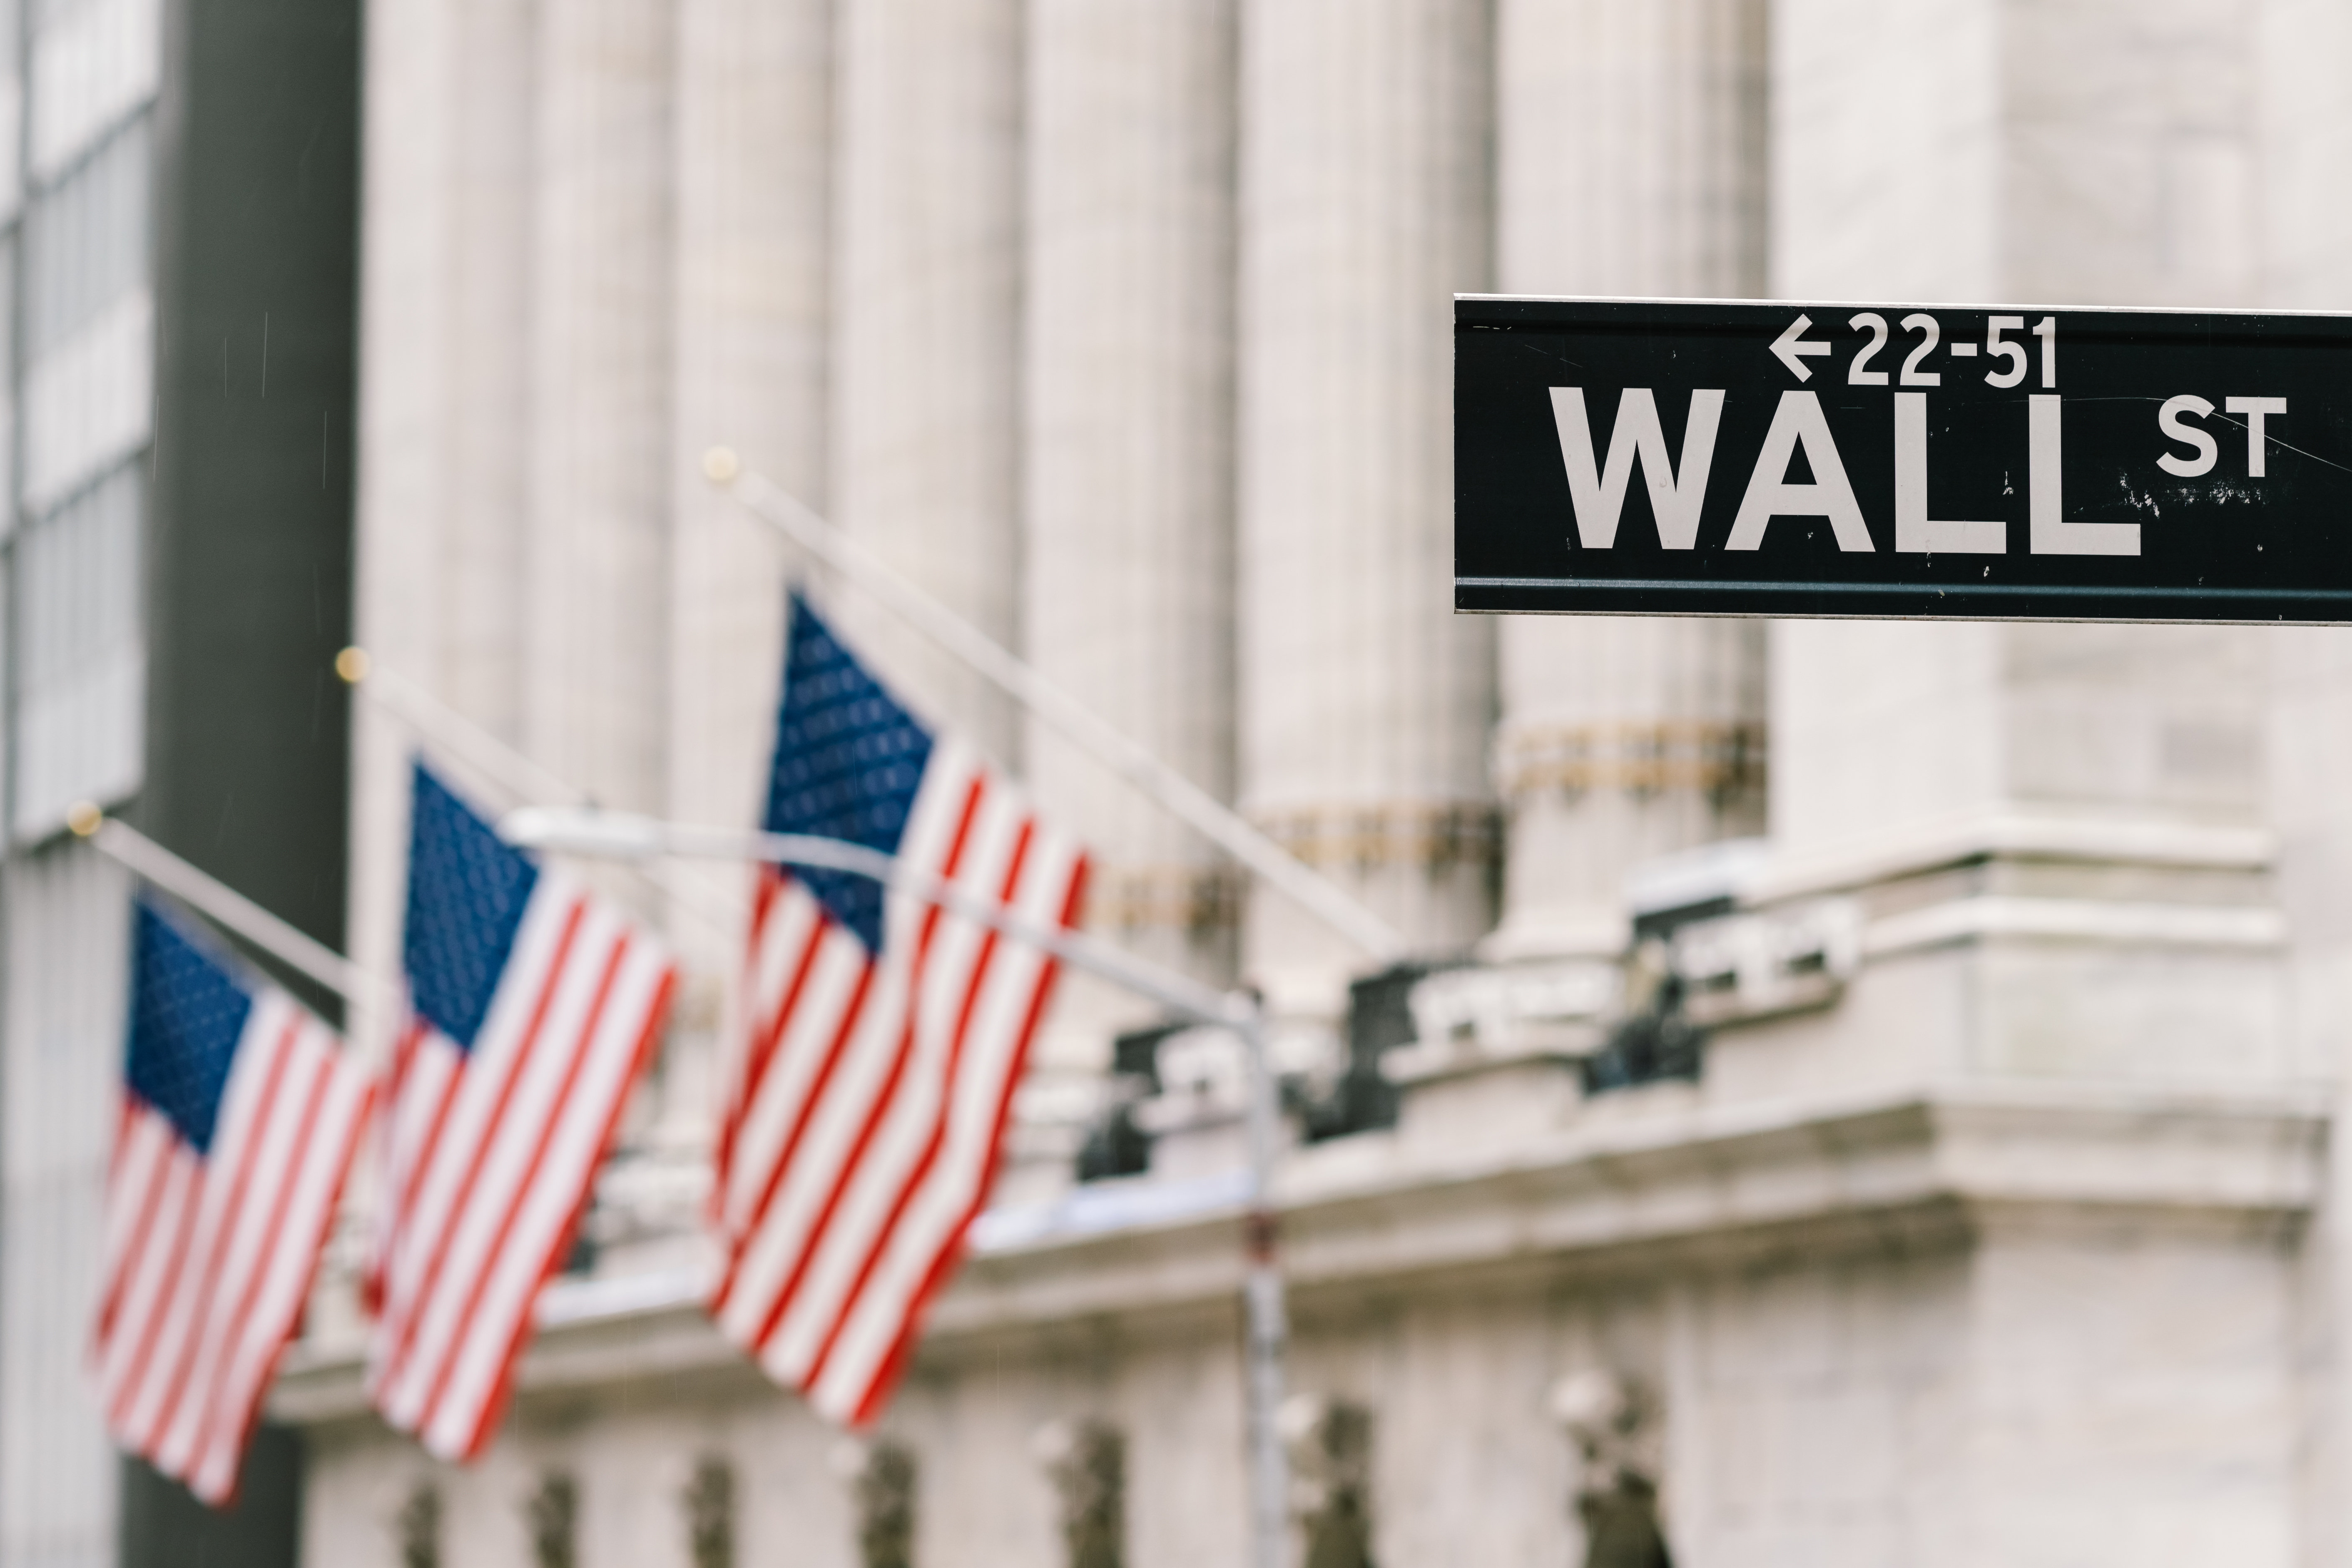 Visit the Financial District and see Wall Street, NYSE, and more.